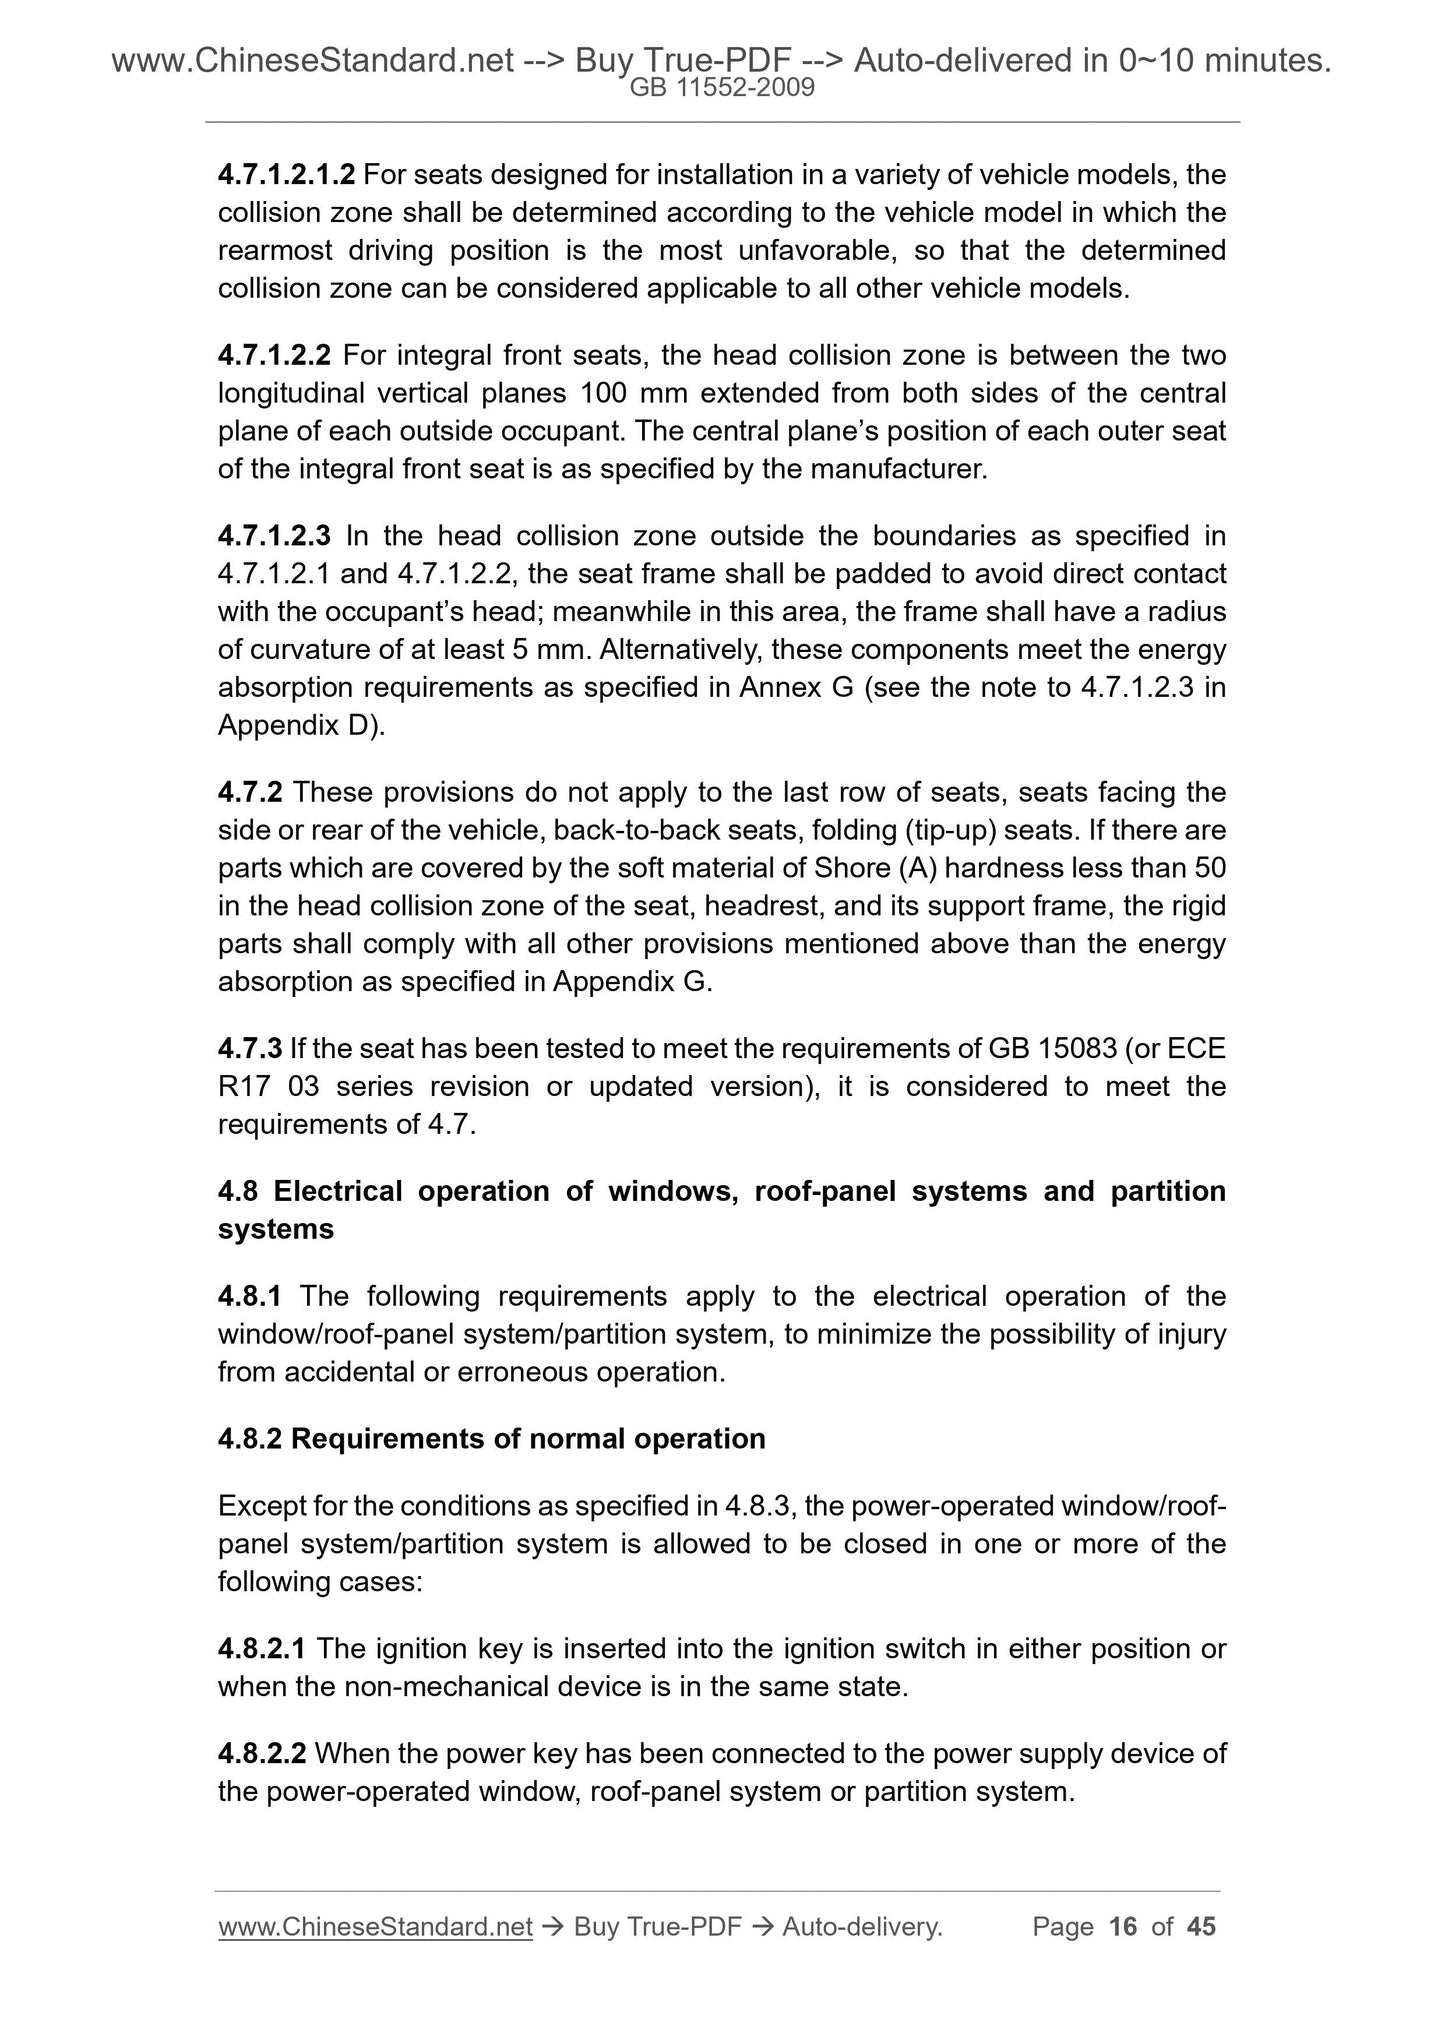 GB 11552-2009 Page 9